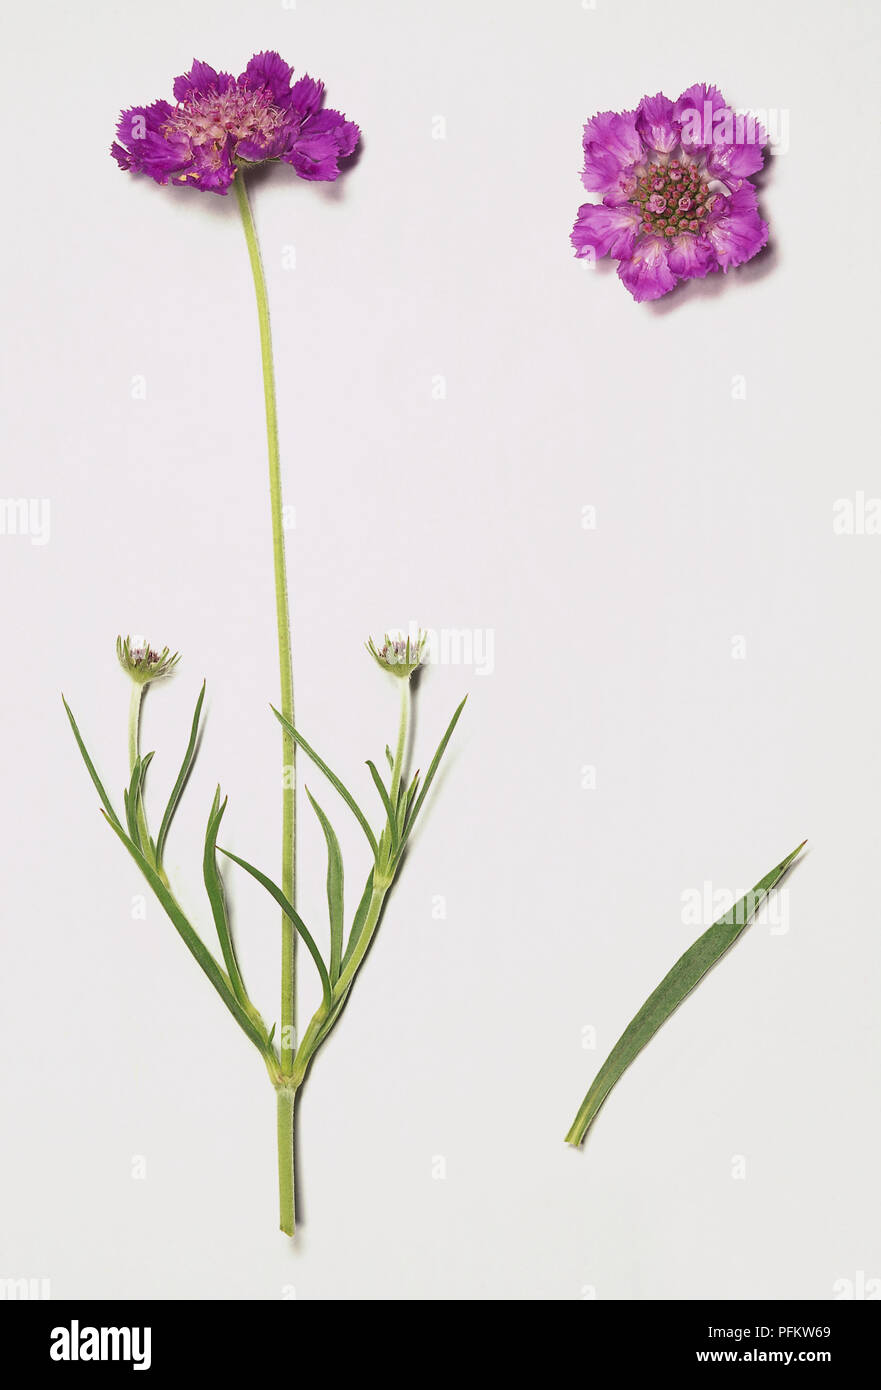 Scabiosa graminifolia stem with opposite linear leaves long thin stem and single flower with pink-purple petals. Stock Photo